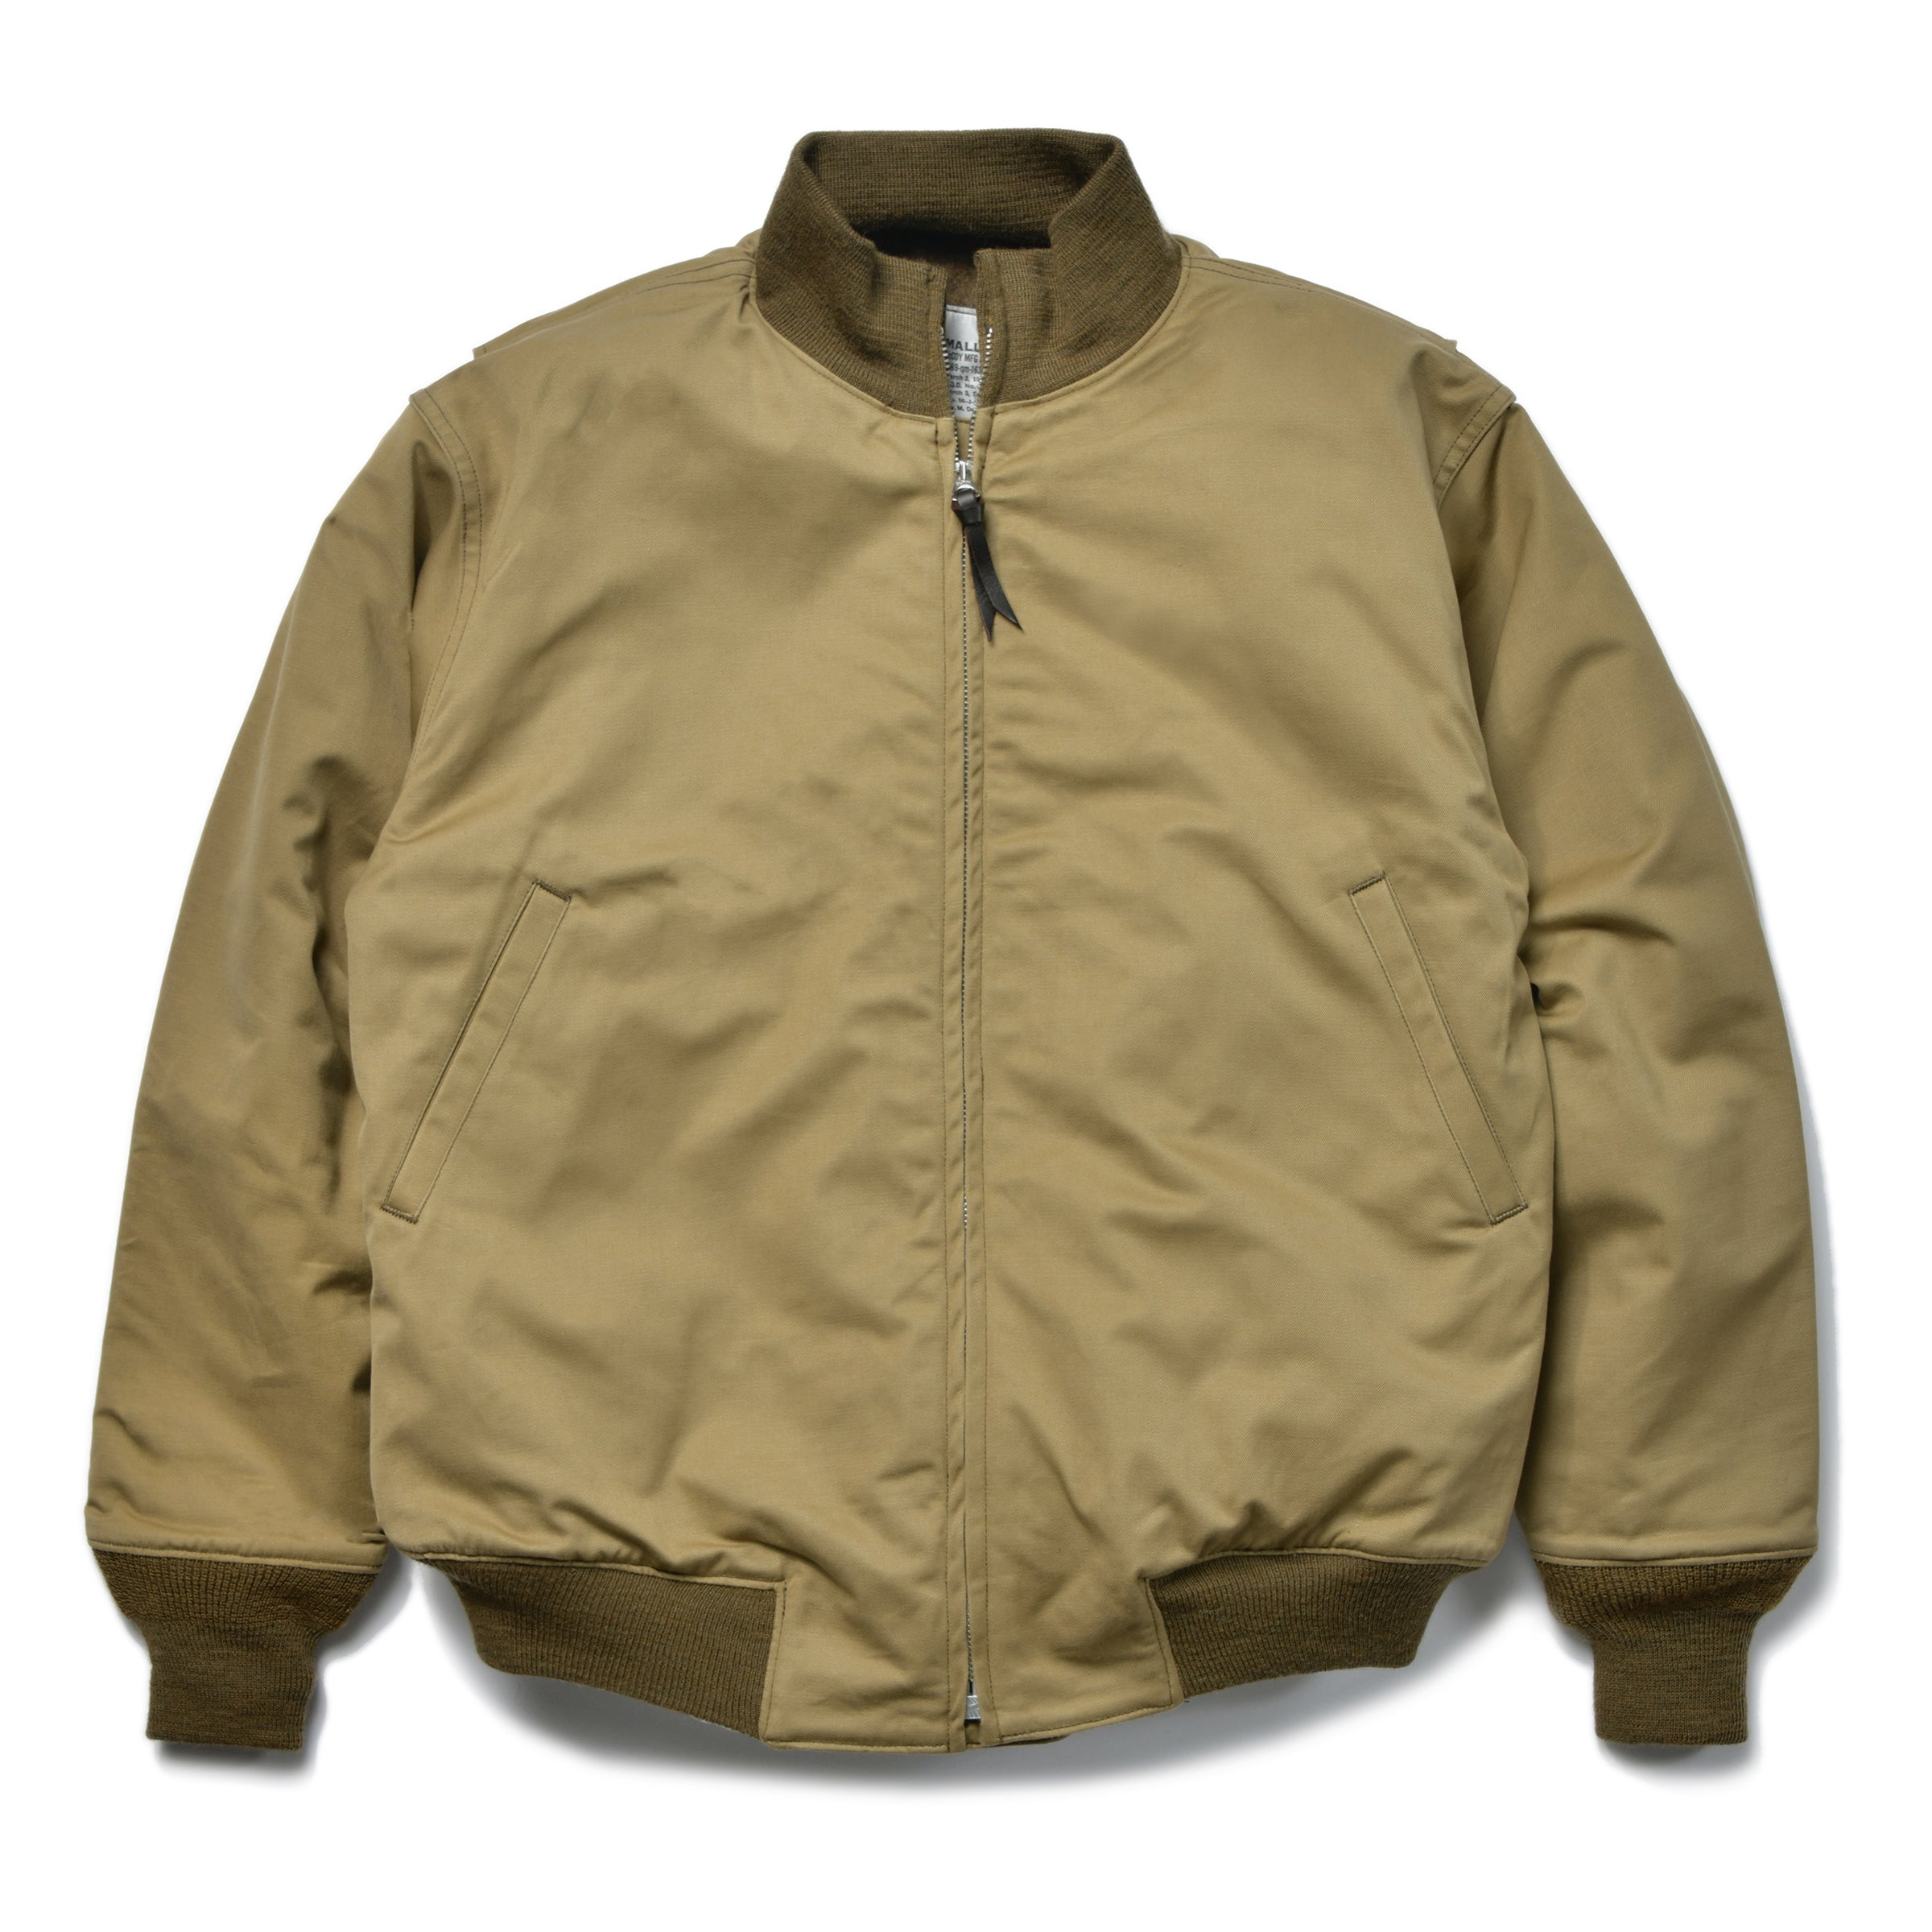 JACKET, COMBAT, WINTER REAL McCOY MFG.CO (FW22) – The Real McCoy's